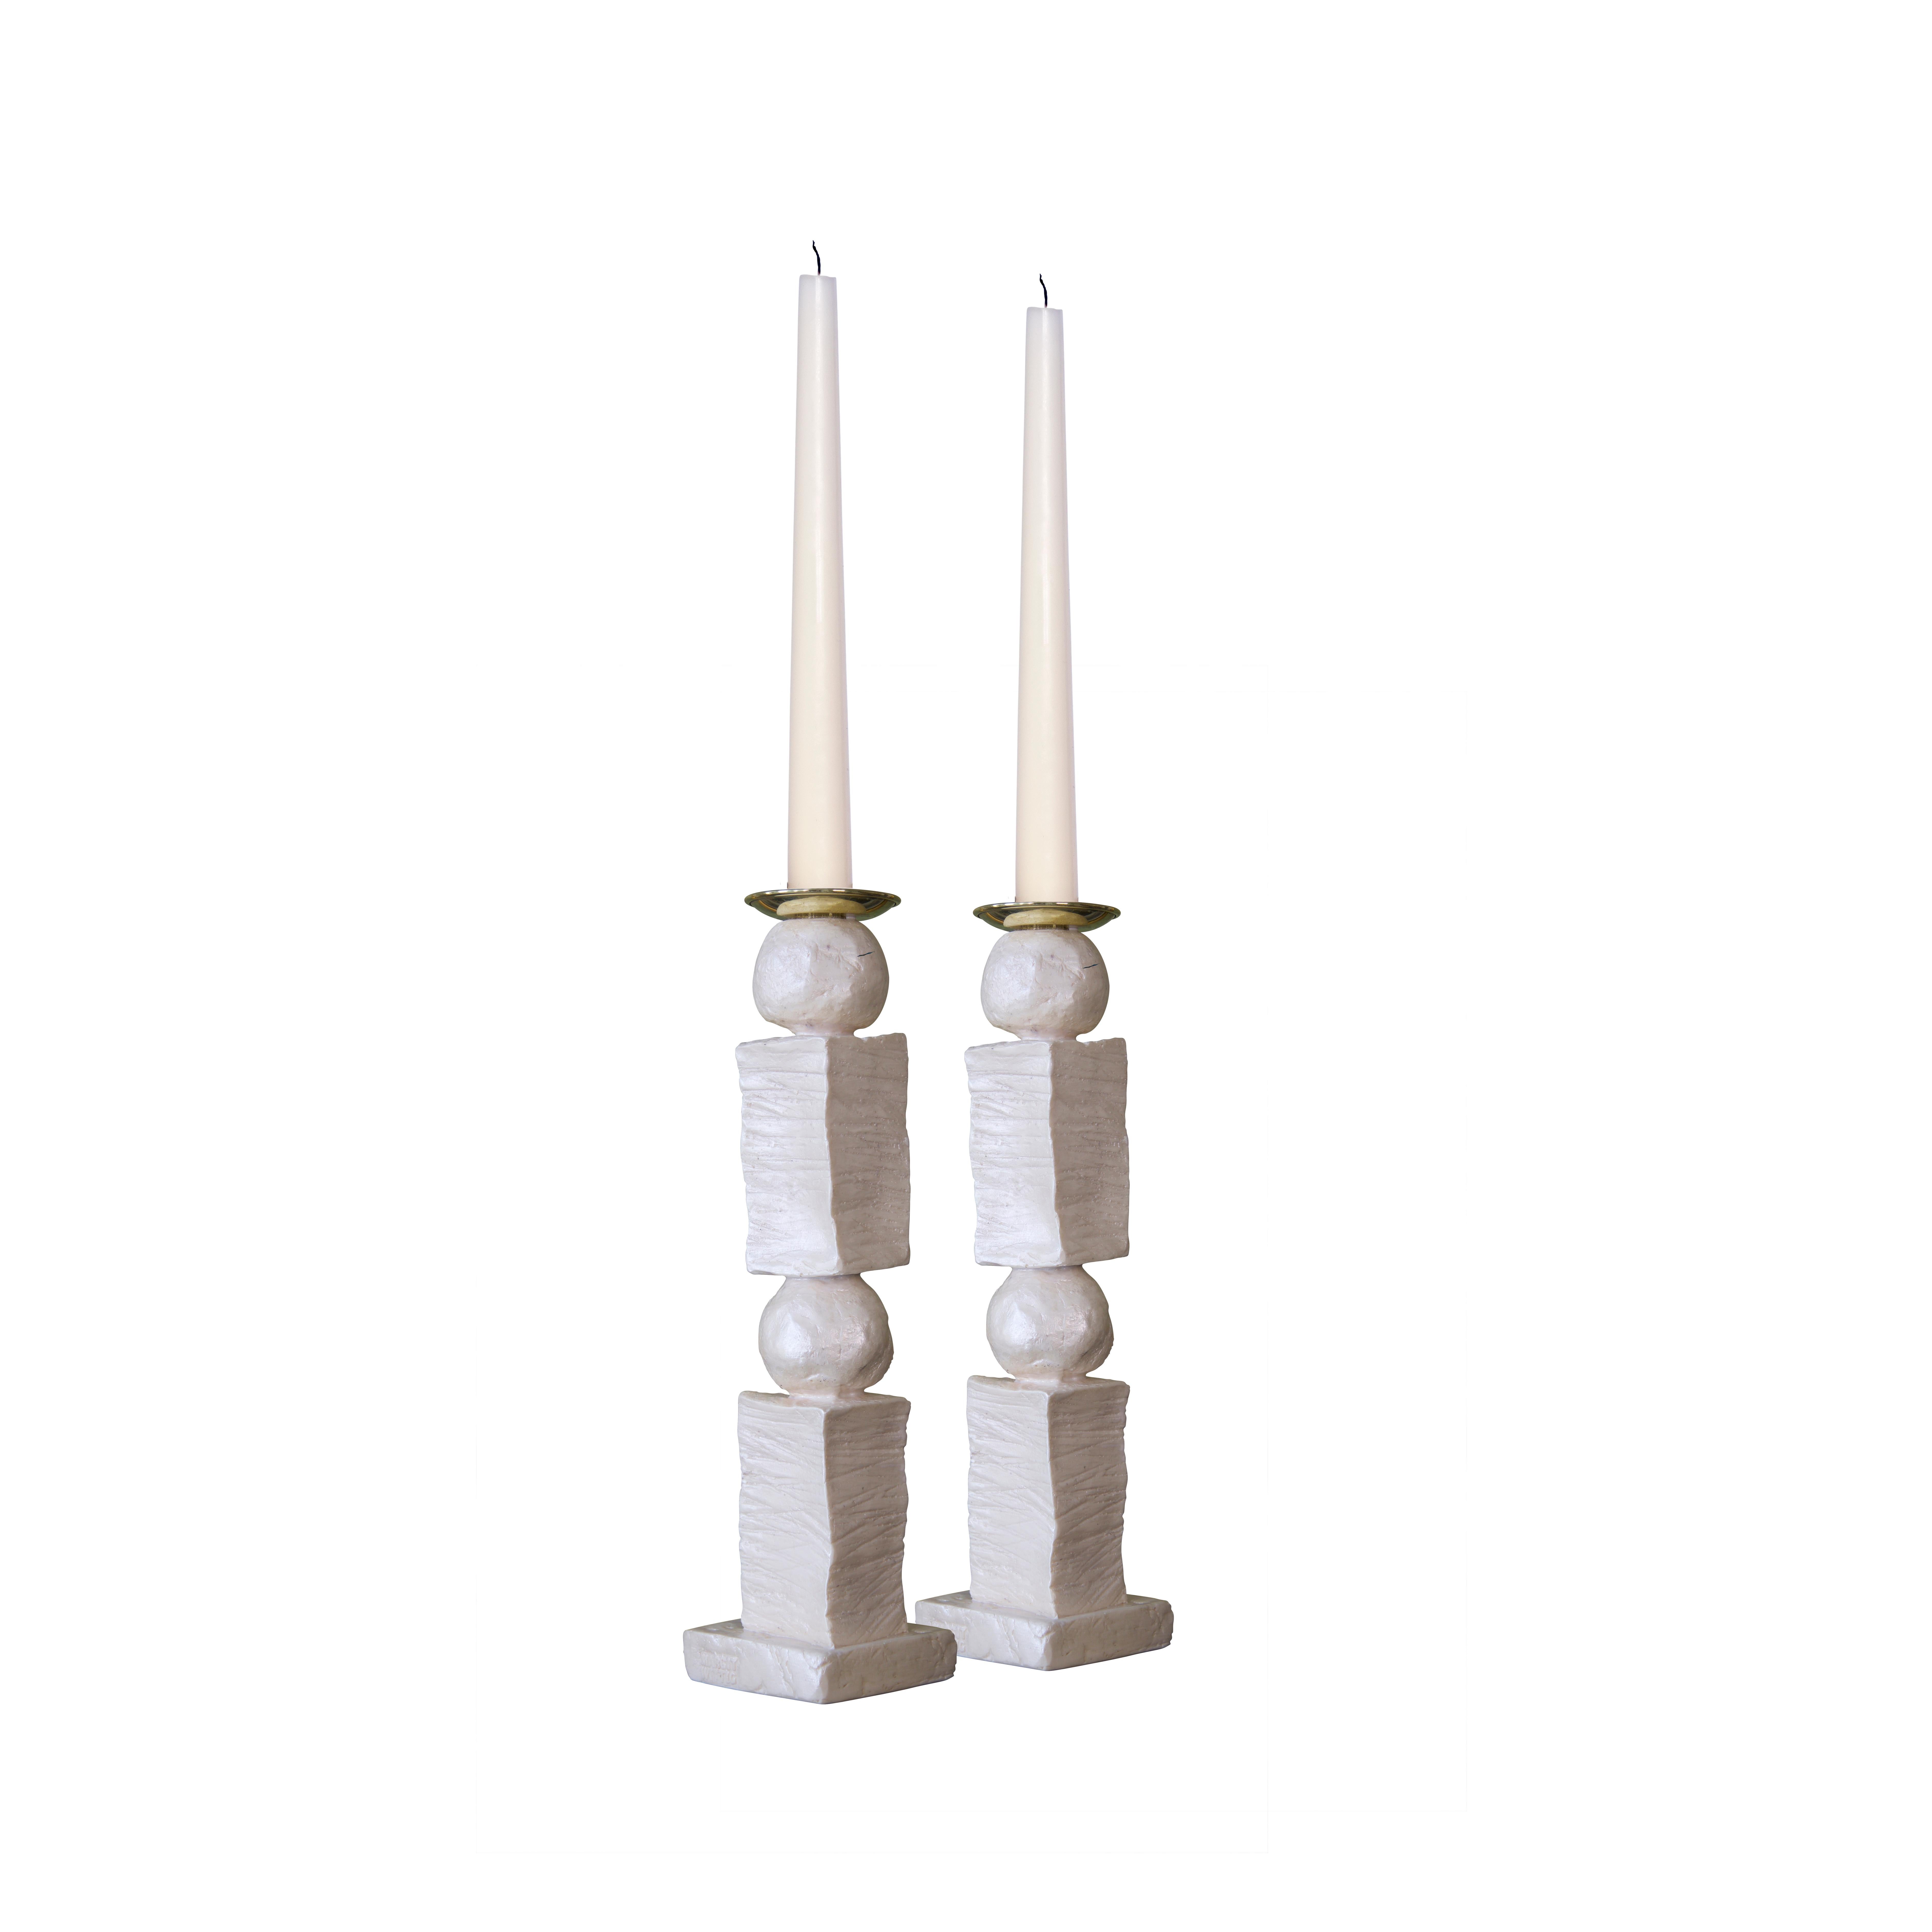 UK customers please note: displayed prices do not include VAT.

Margit Wittig has used her sculptural skills to create beautifully-crafted, well-proportioned candlesticks, which are compositions of her unique signature pearl-shaped